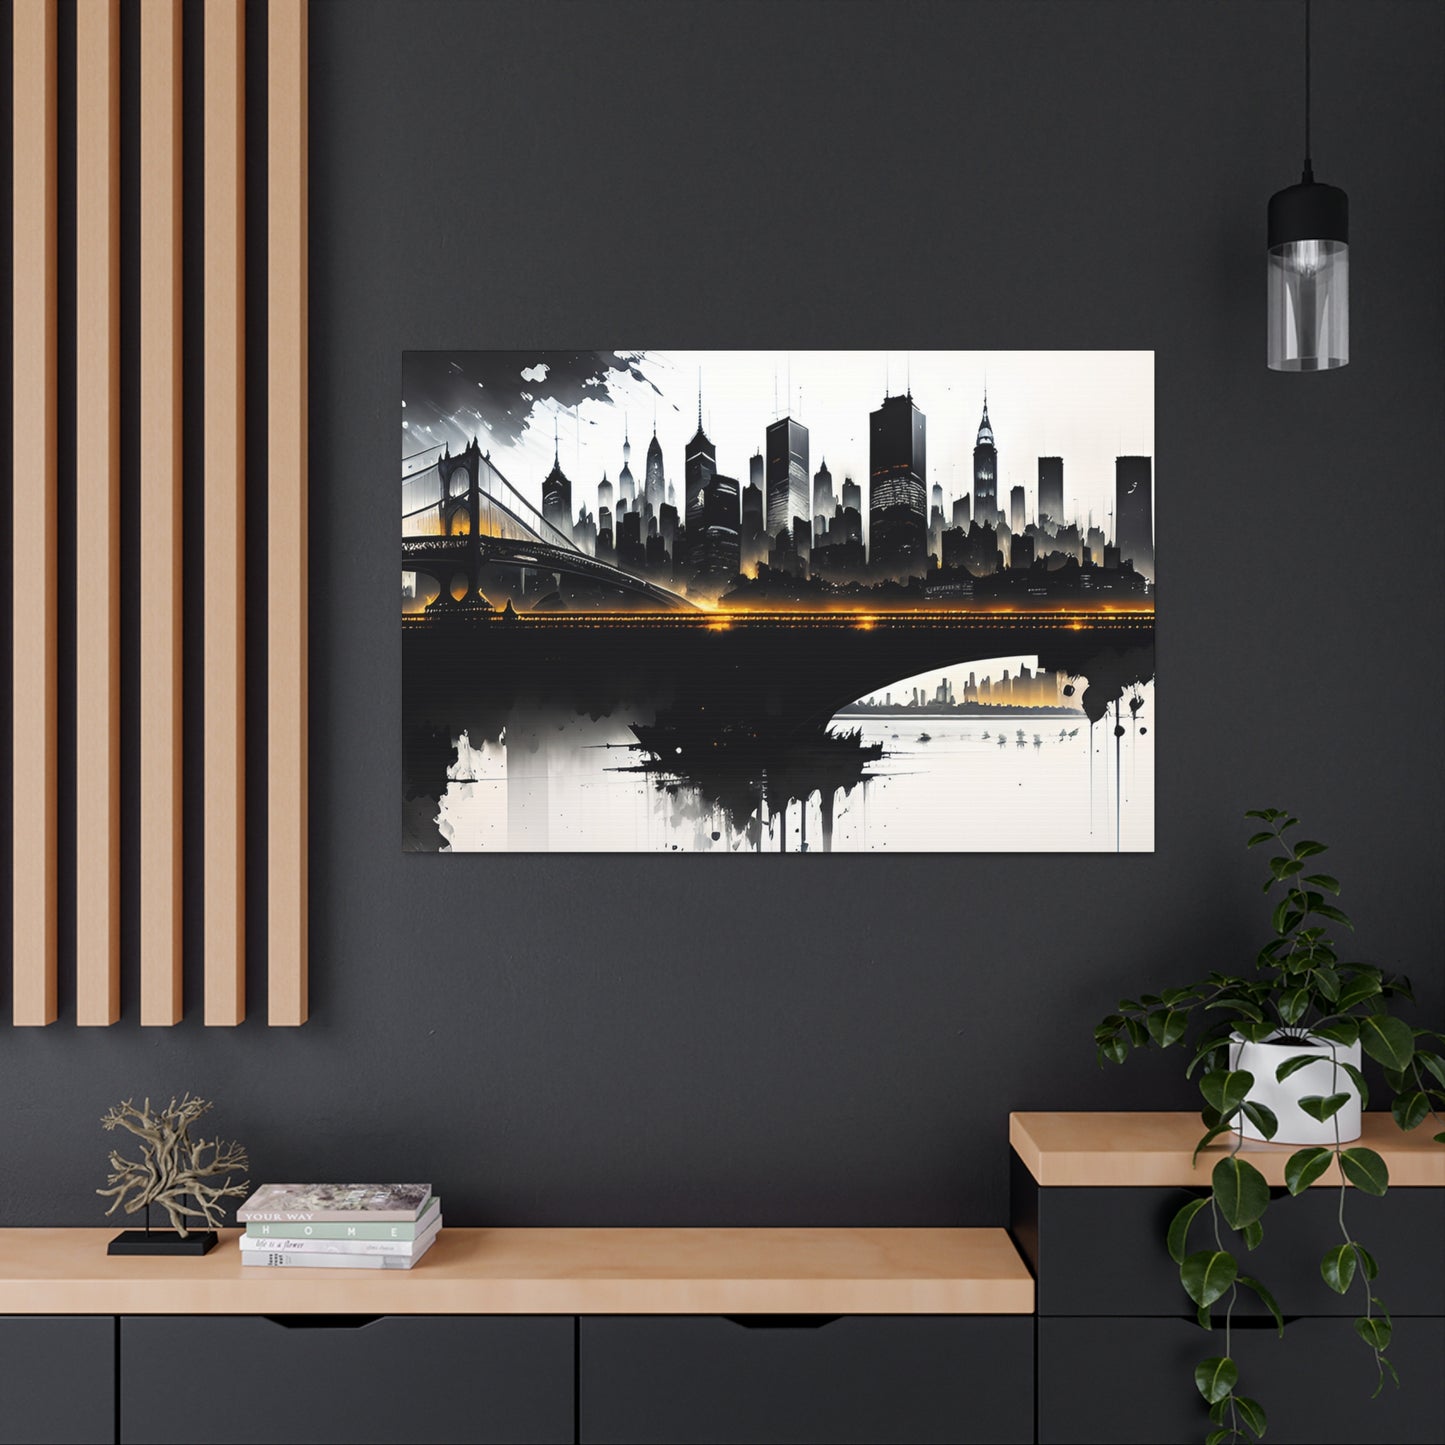 Abstract Cityscape, Canvas Wall Art, Black & White, Contrast, Living Room, Game Room, Bed Room